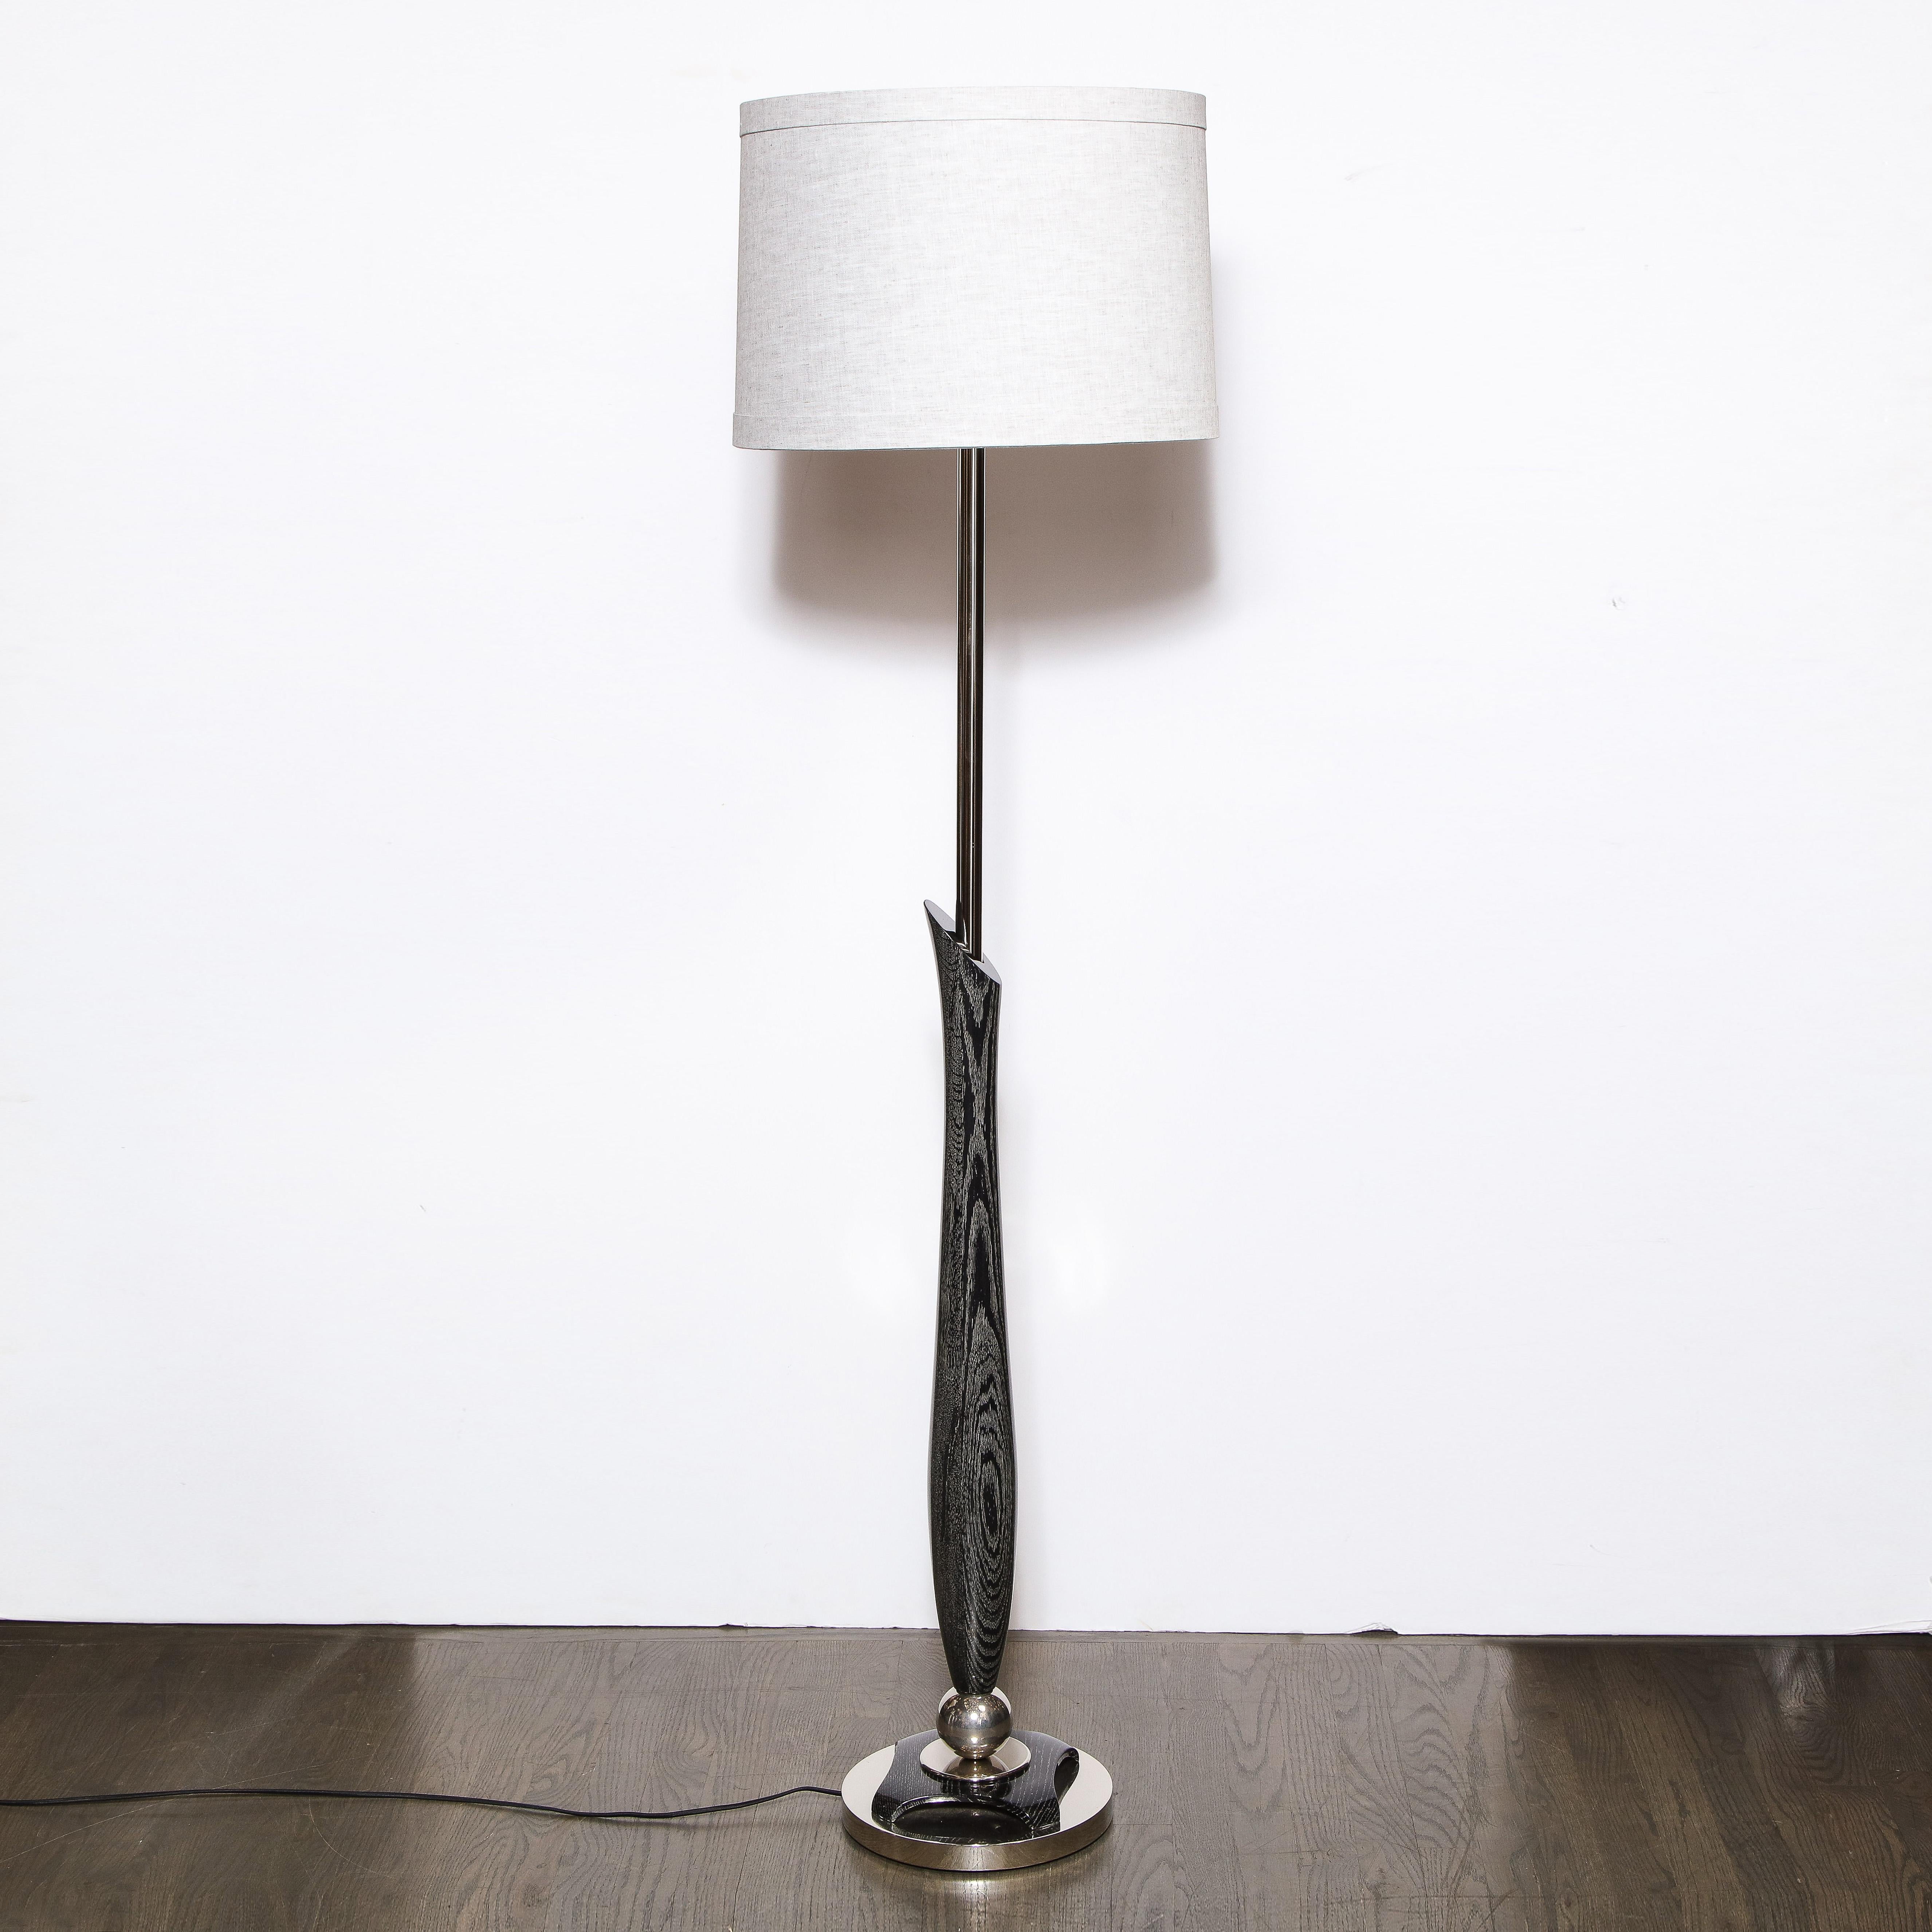 Mid-20th Century Mid-Century Modern Sculptural Silver Cerused and Brushed Aluminum Floor Lamp For Sale